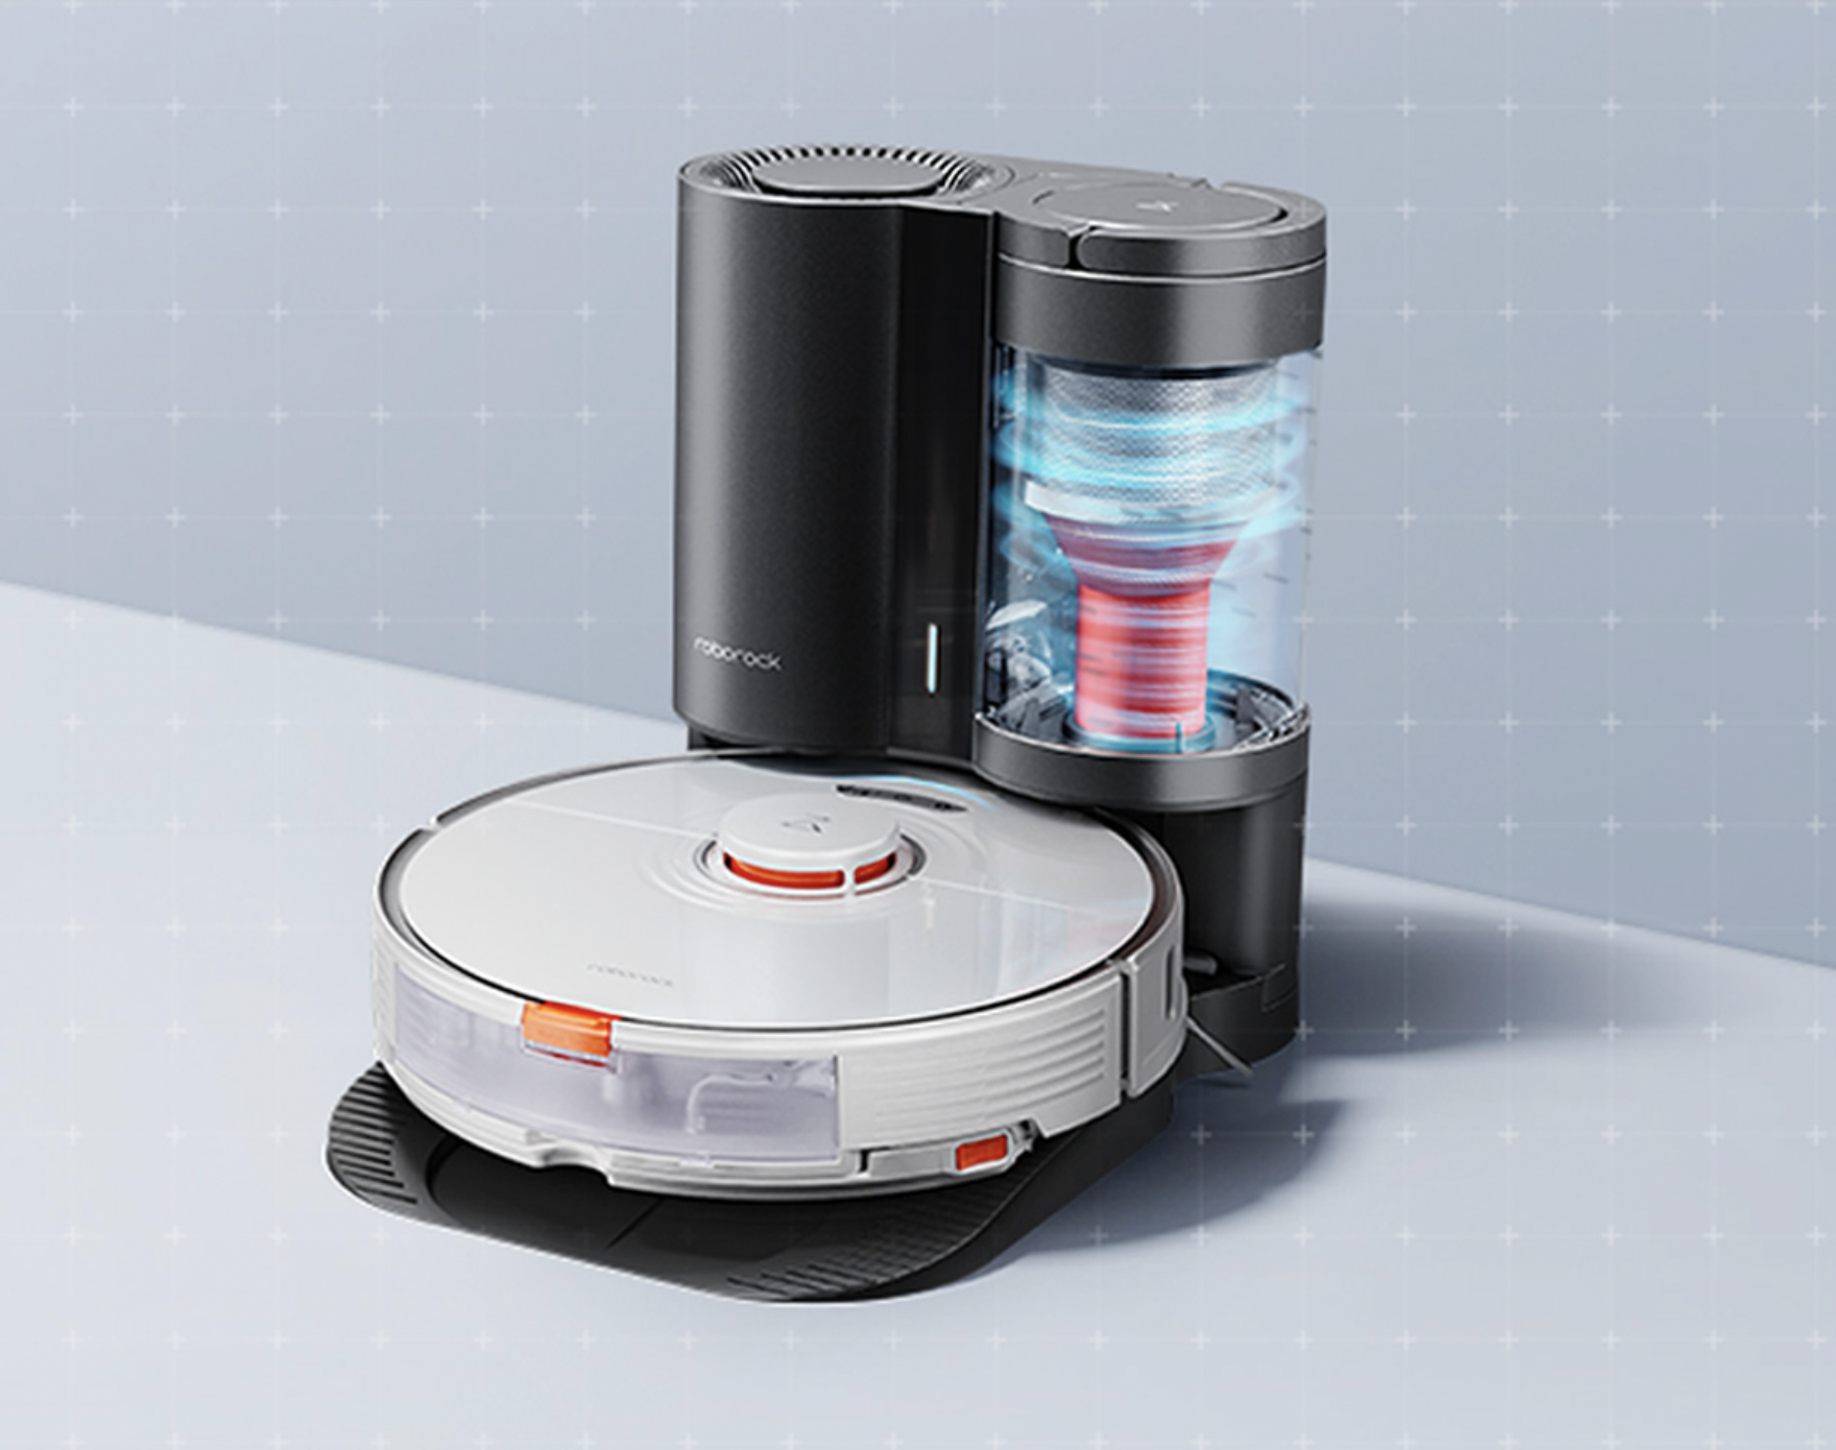 Roborock T7S vacuum cleaner launched in China; now up for pre-sale at 2,499 yuan ($381) - Gizmochina